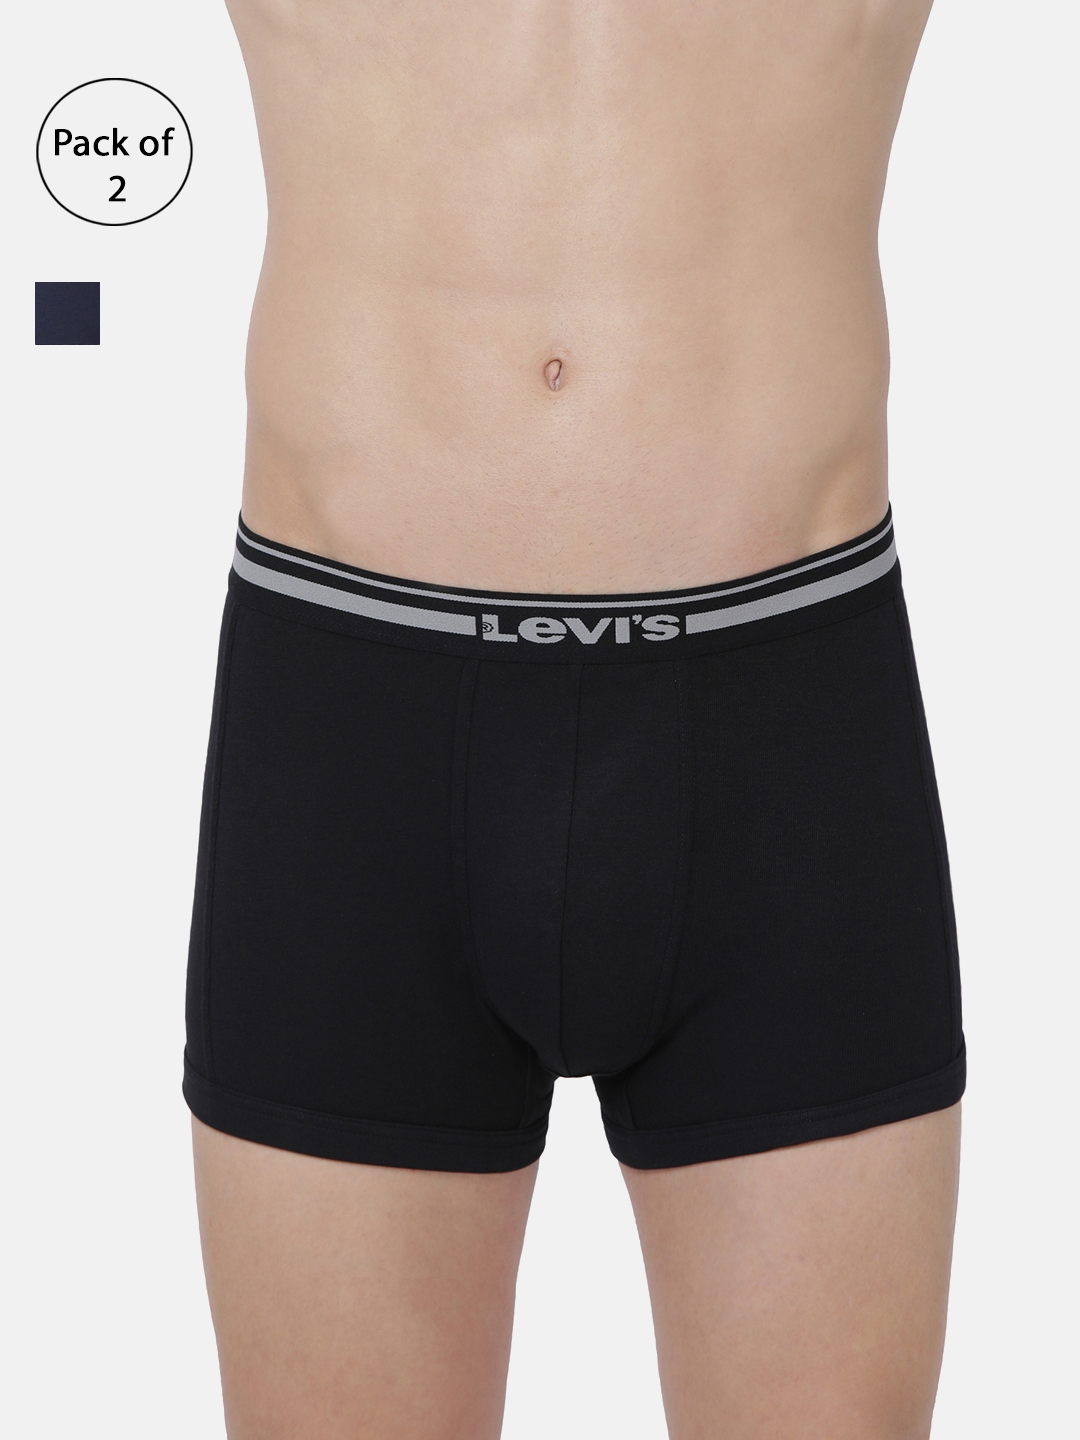 Buy Levis Pack Of 2 Smartskin Technology Cotton Trunks With Tag Free  Comfort #003 - Trunk for Men 9261049 | Myntra